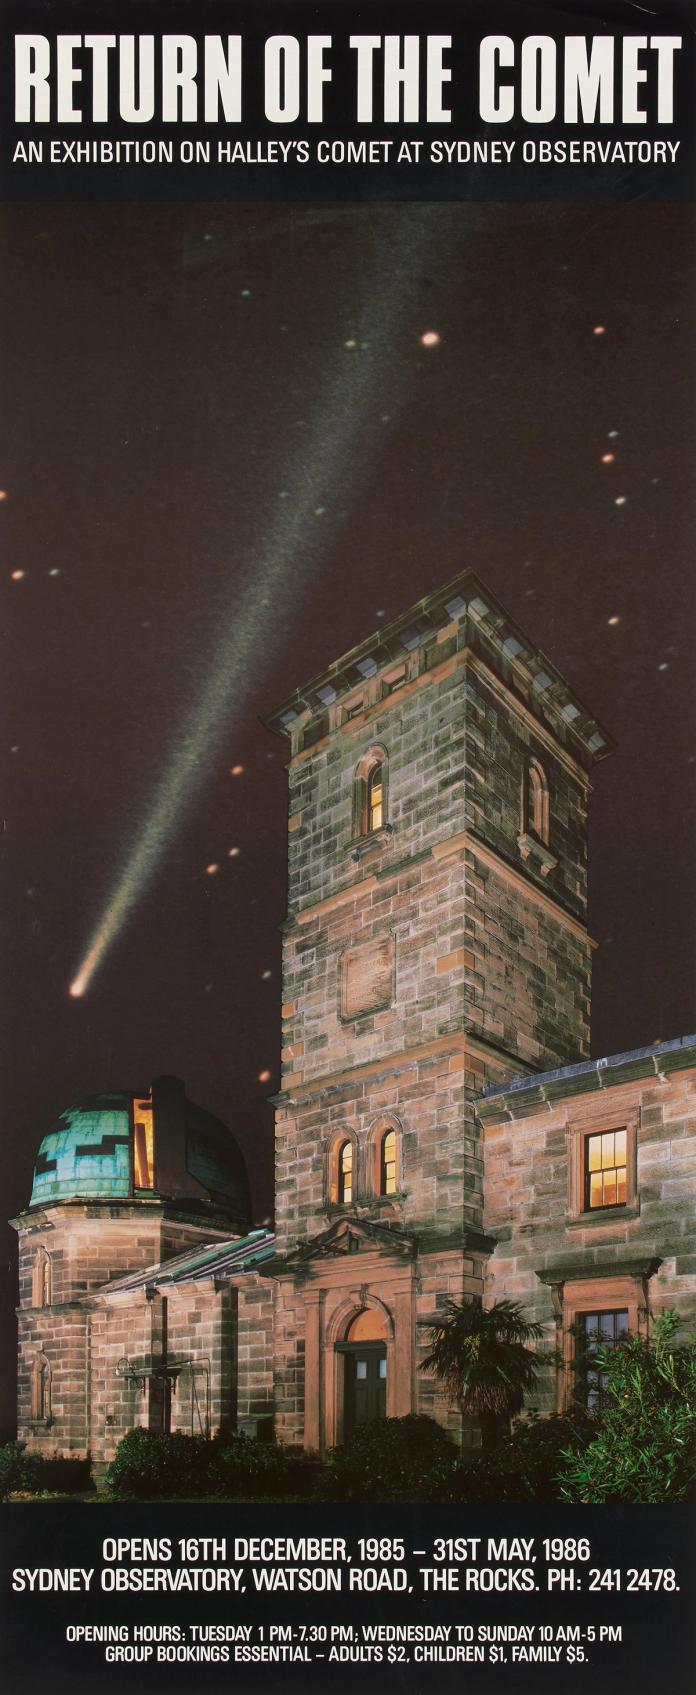 Colour poster to promote the ‘Return of the Comet’ showing Halley’s Comet behind the Sydney Observatory